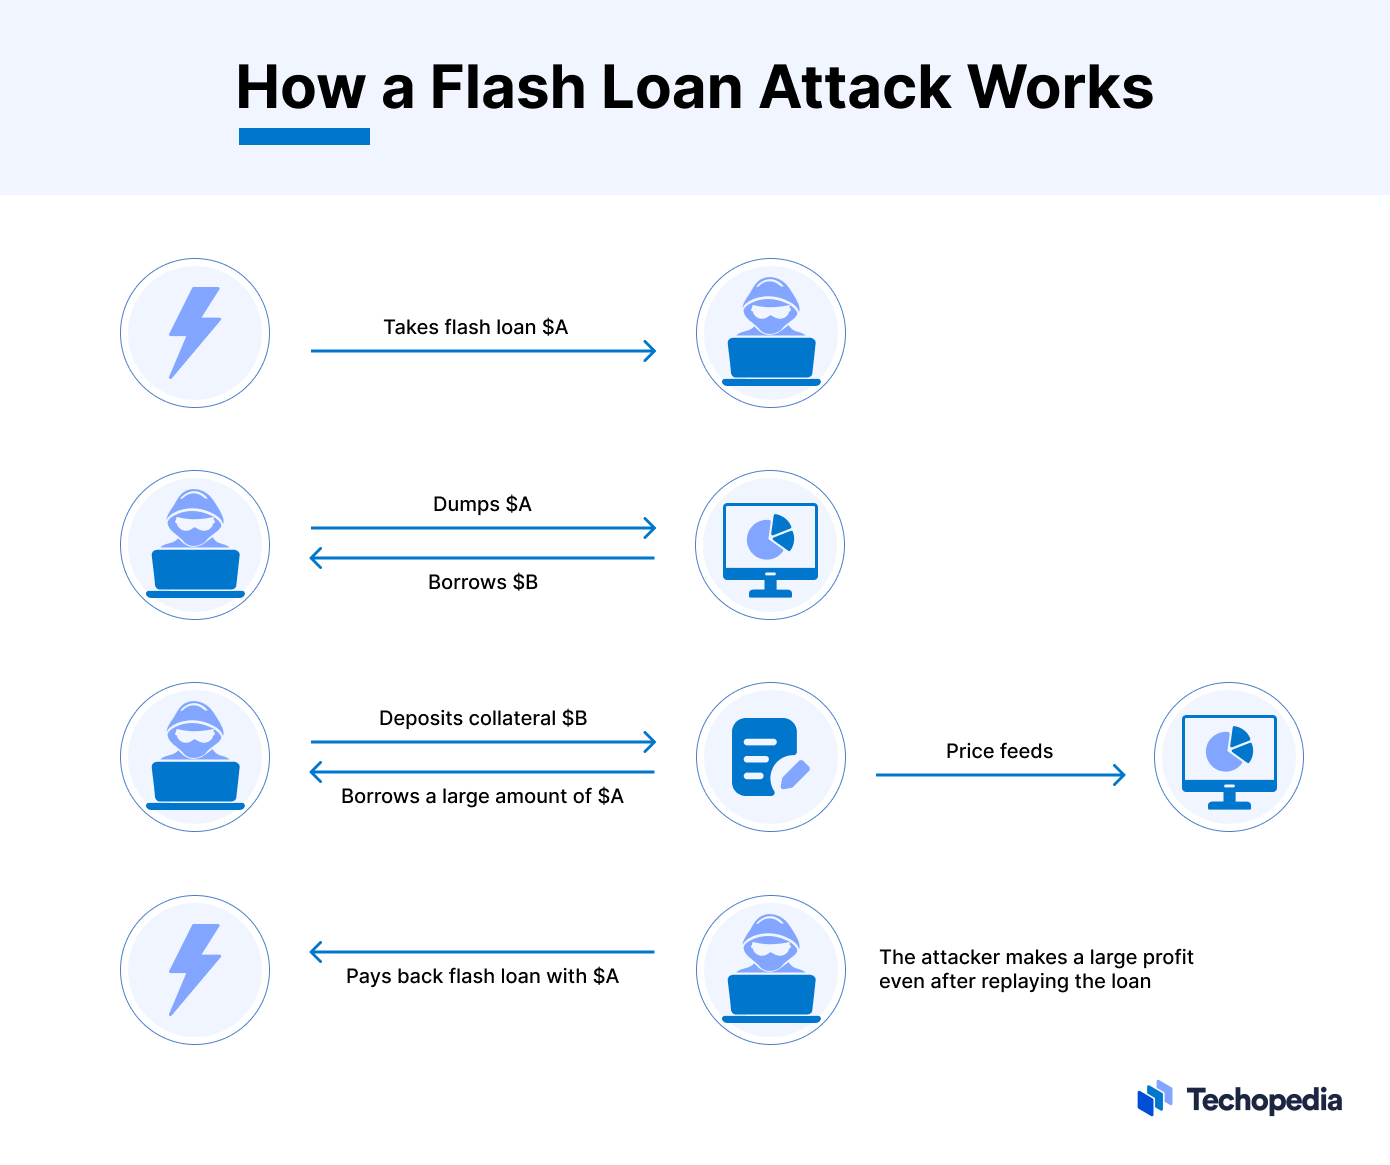 How a Flash Loan Attack Works